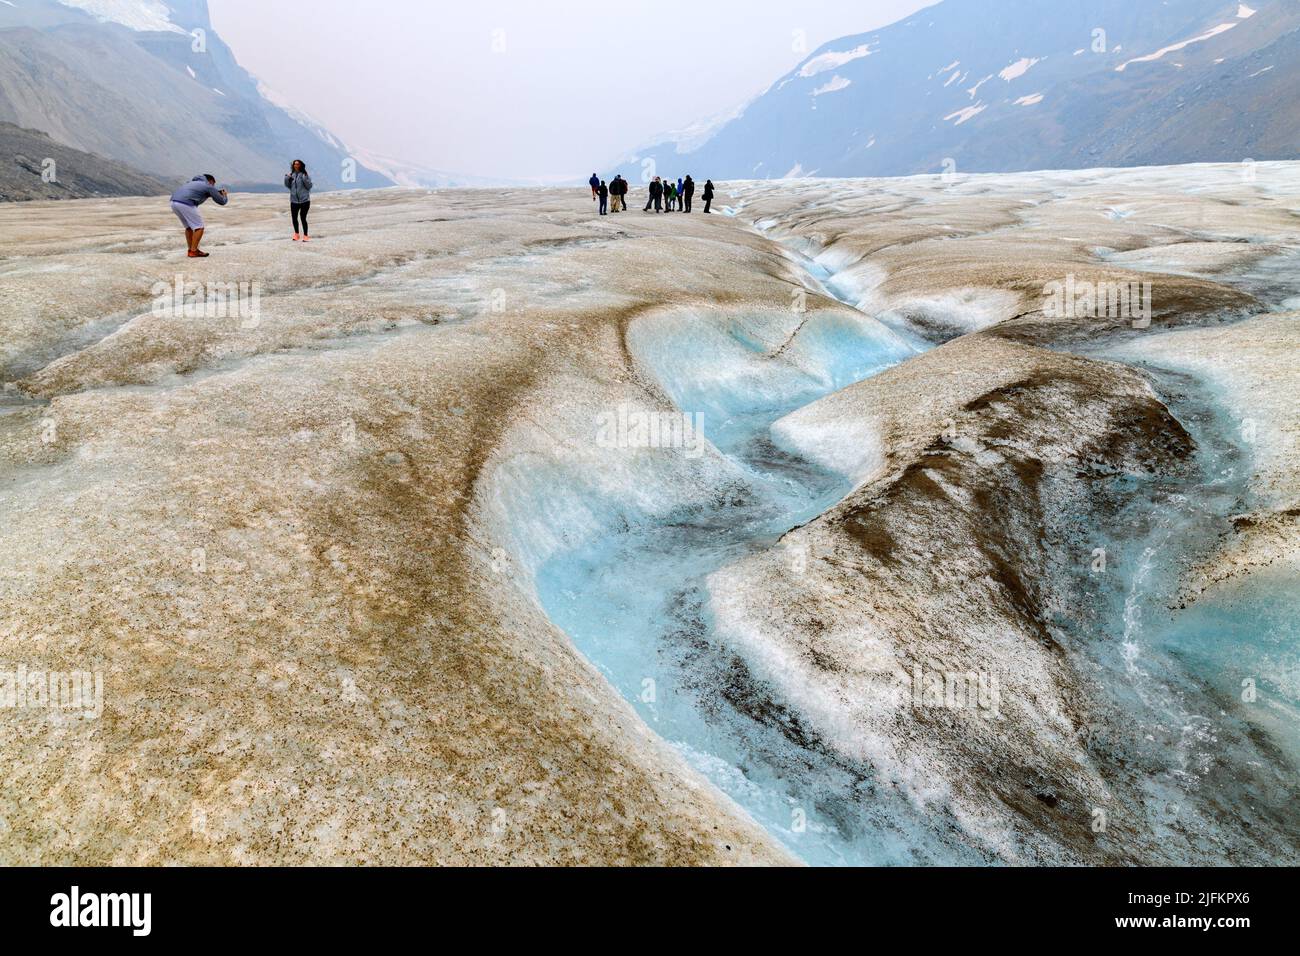 Surface melt water flowing through sinuous channel on the Athabasca Glacier. There are some people in the background exploring the glacier by walking Stock Photo